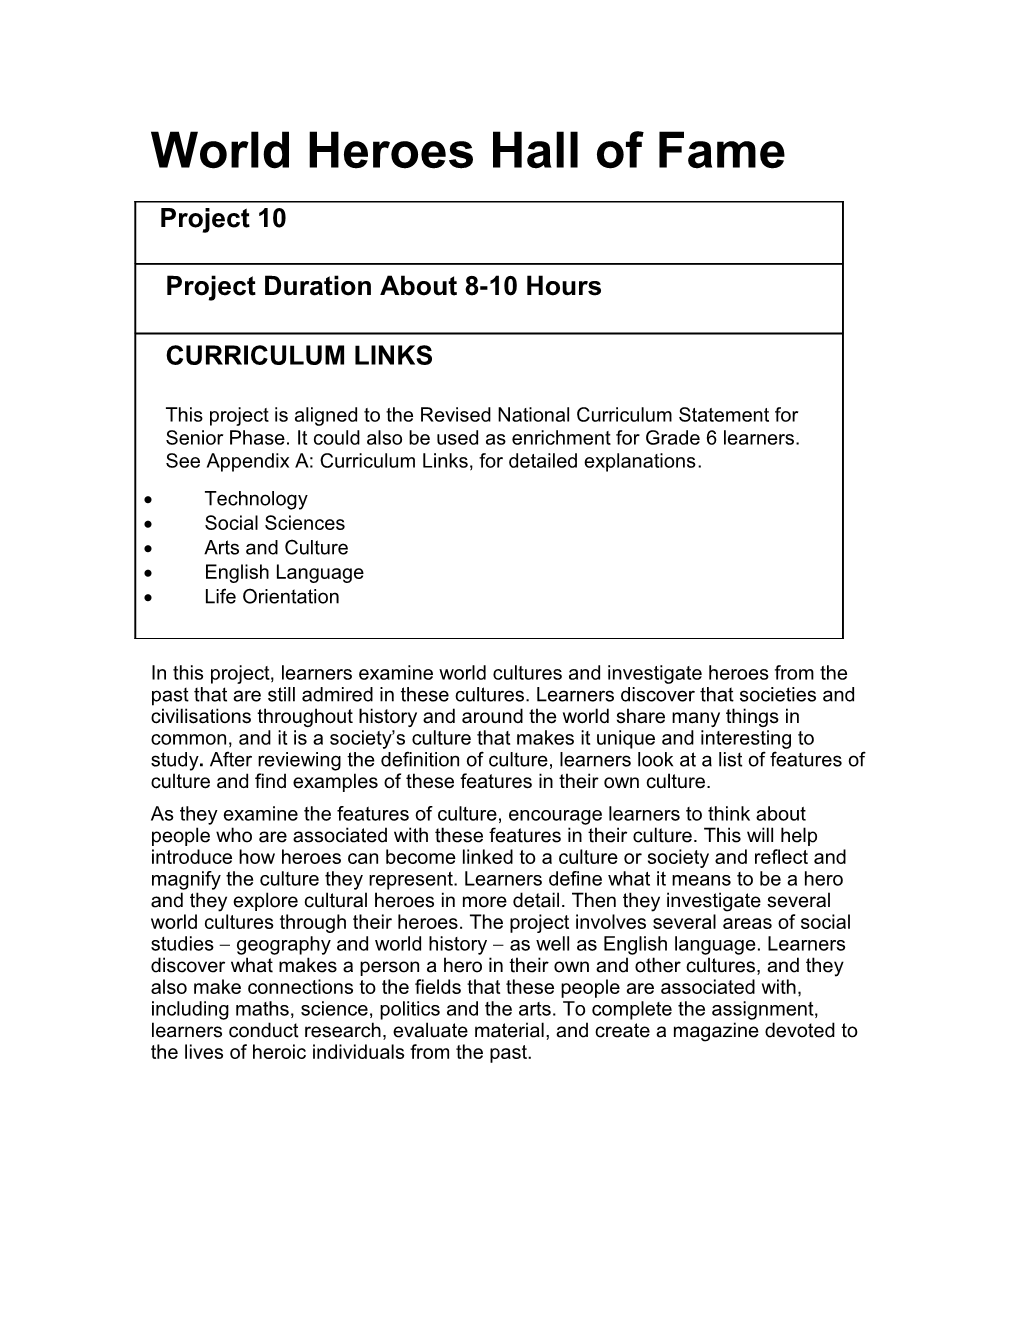 World Heroes Hall of Fame